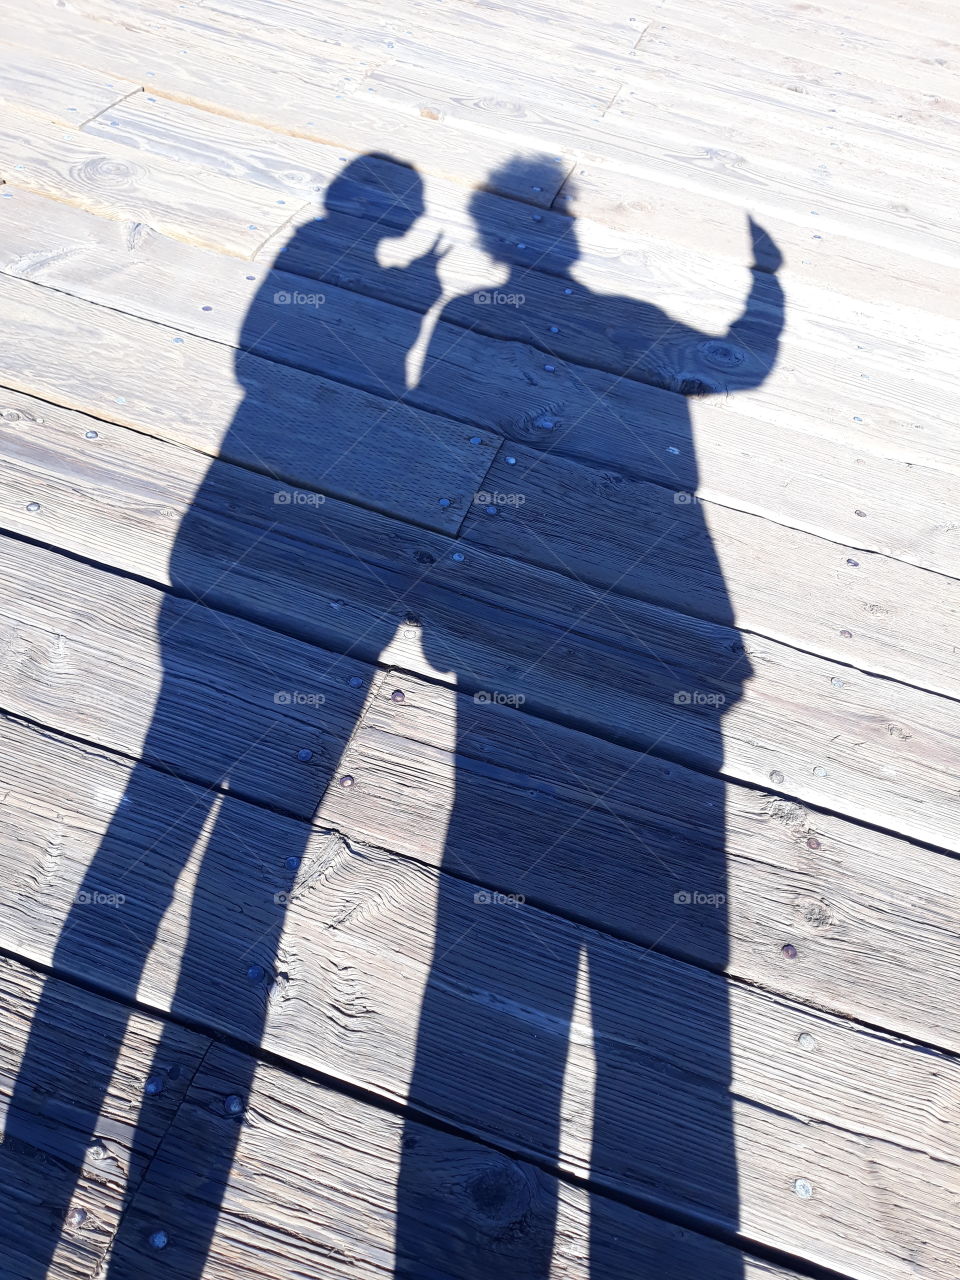 People always take selfies on their phones, but I wanted to capture how they look to others. The sun made this shadow perfect, in which we can see and imagine this action of taking a selfie happening before our very eyes